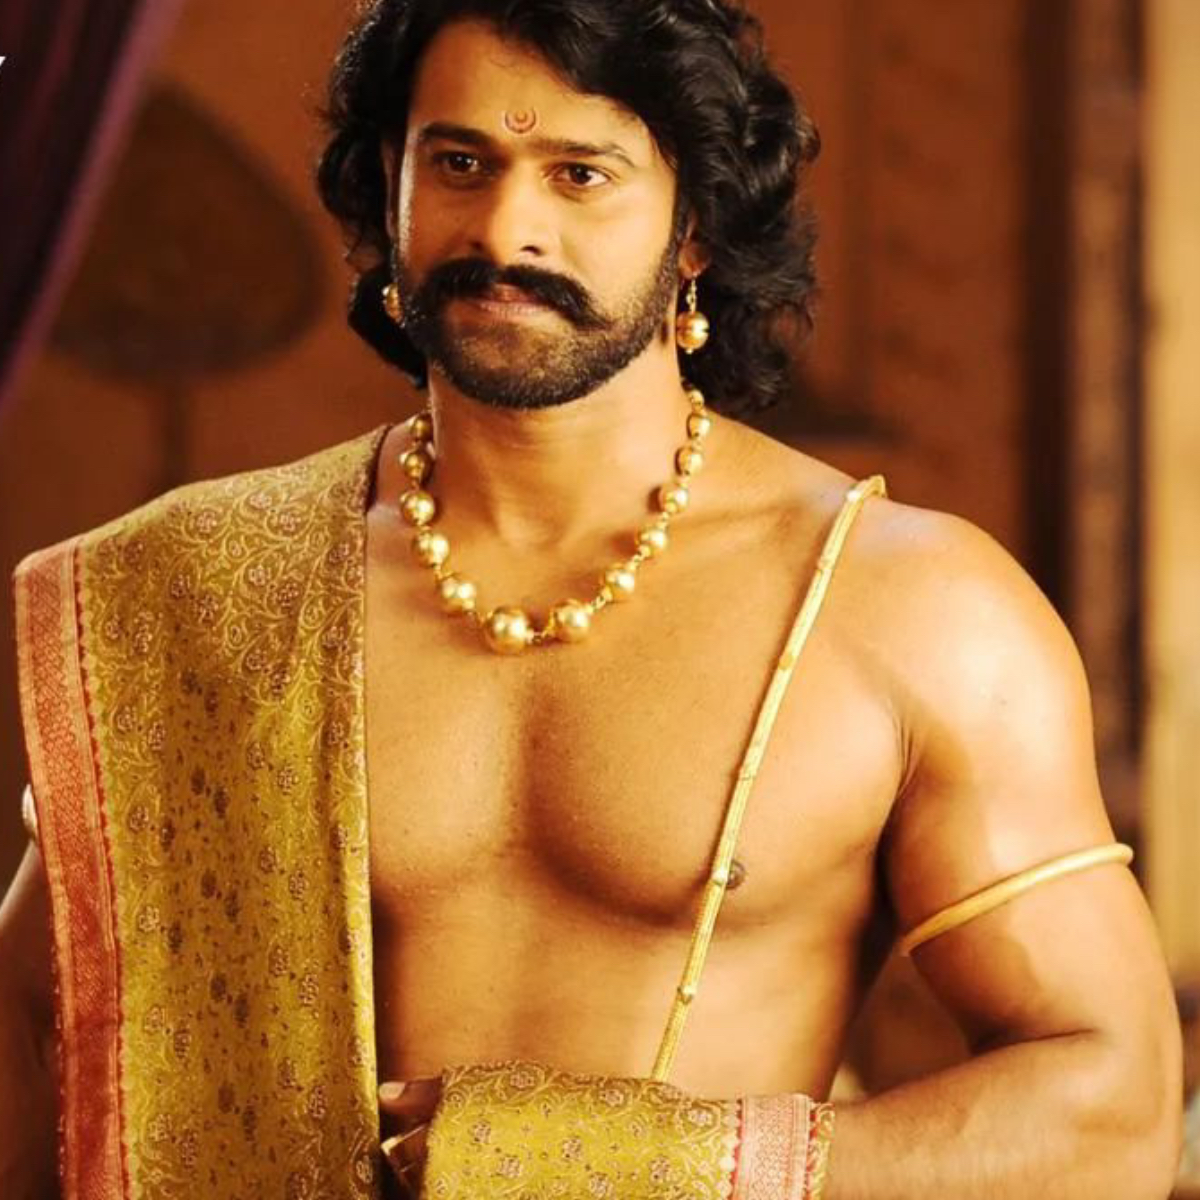 An Incredible Compilation of Over 999+ Prabhas Bahubali Images in Stunning 4K Quality